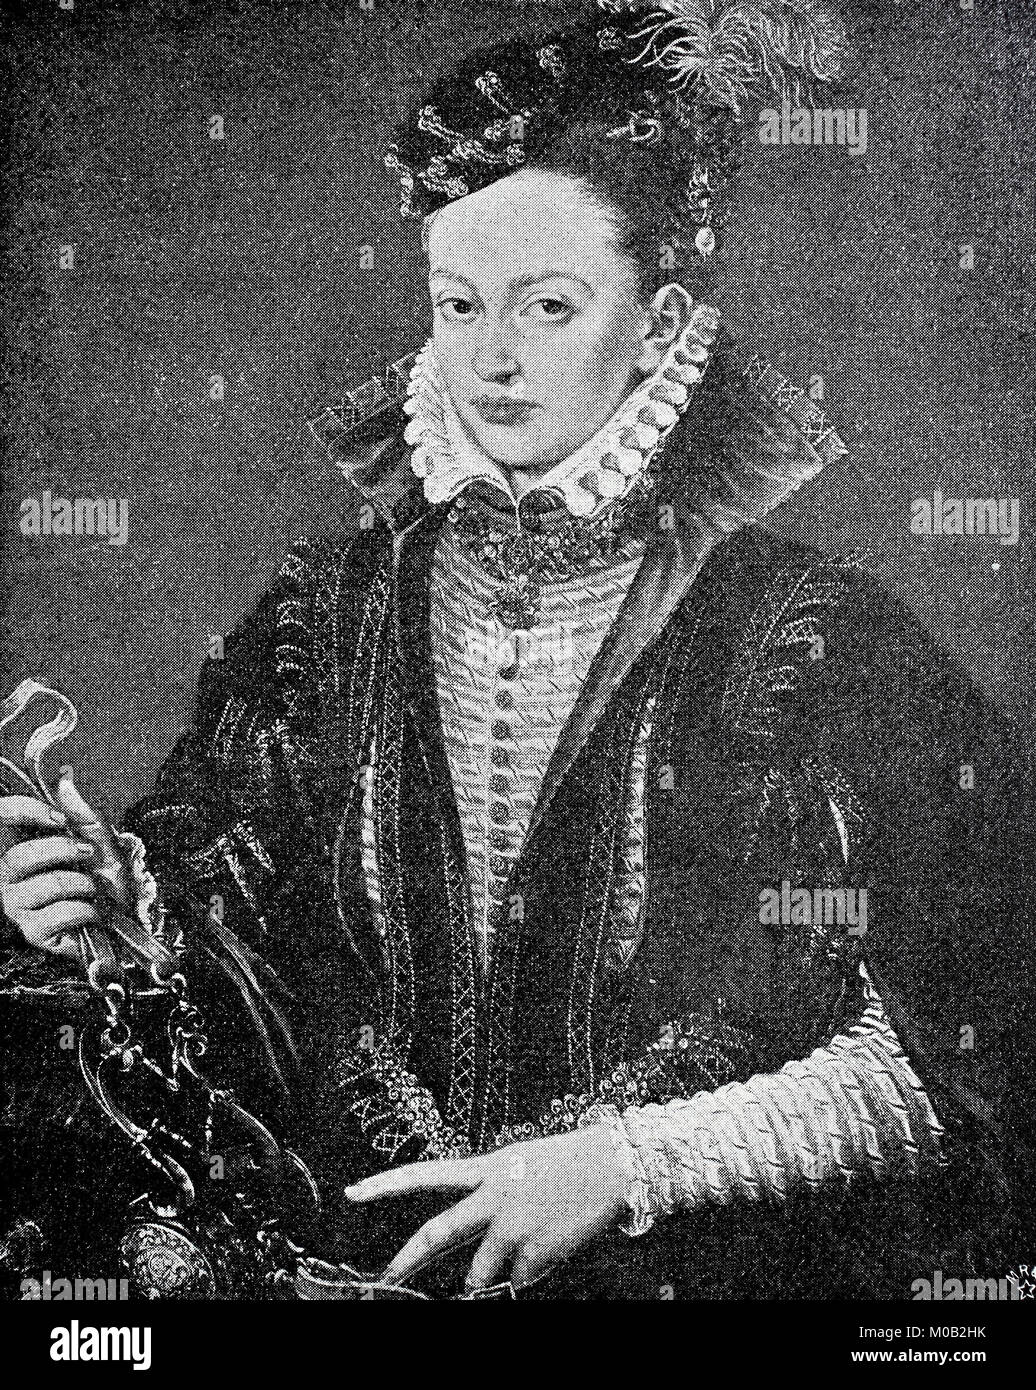 Margaret of Parma, 28 December 1522 - 18 January 1586, was Governor of the Netherlands from 1559 to 1567 and from 1578 to 1582, after a painting in the Royal Museum of Brussels, digital improved reproduction of an original print from 1880 Stock Photo